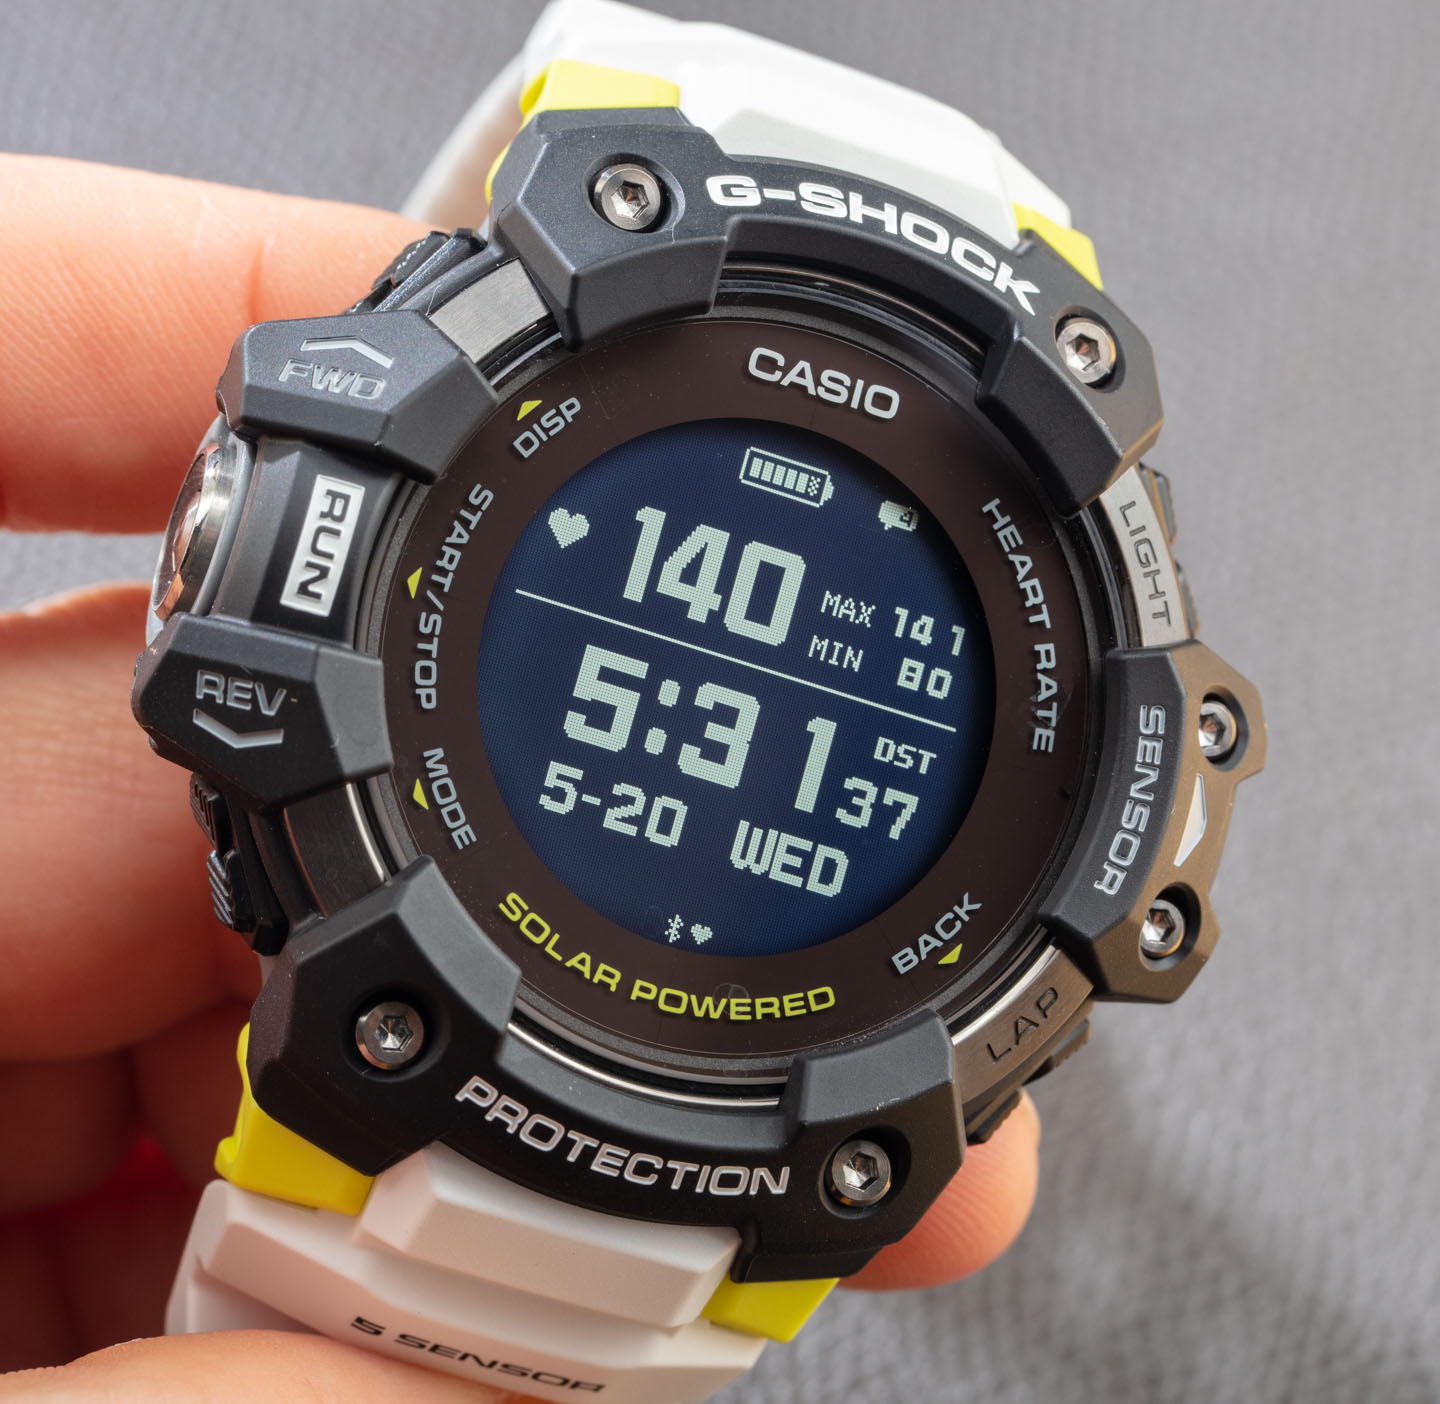 Watch Review: Casio G-Shock Move GBD-H1000 GPS Heart-Rate Monitor